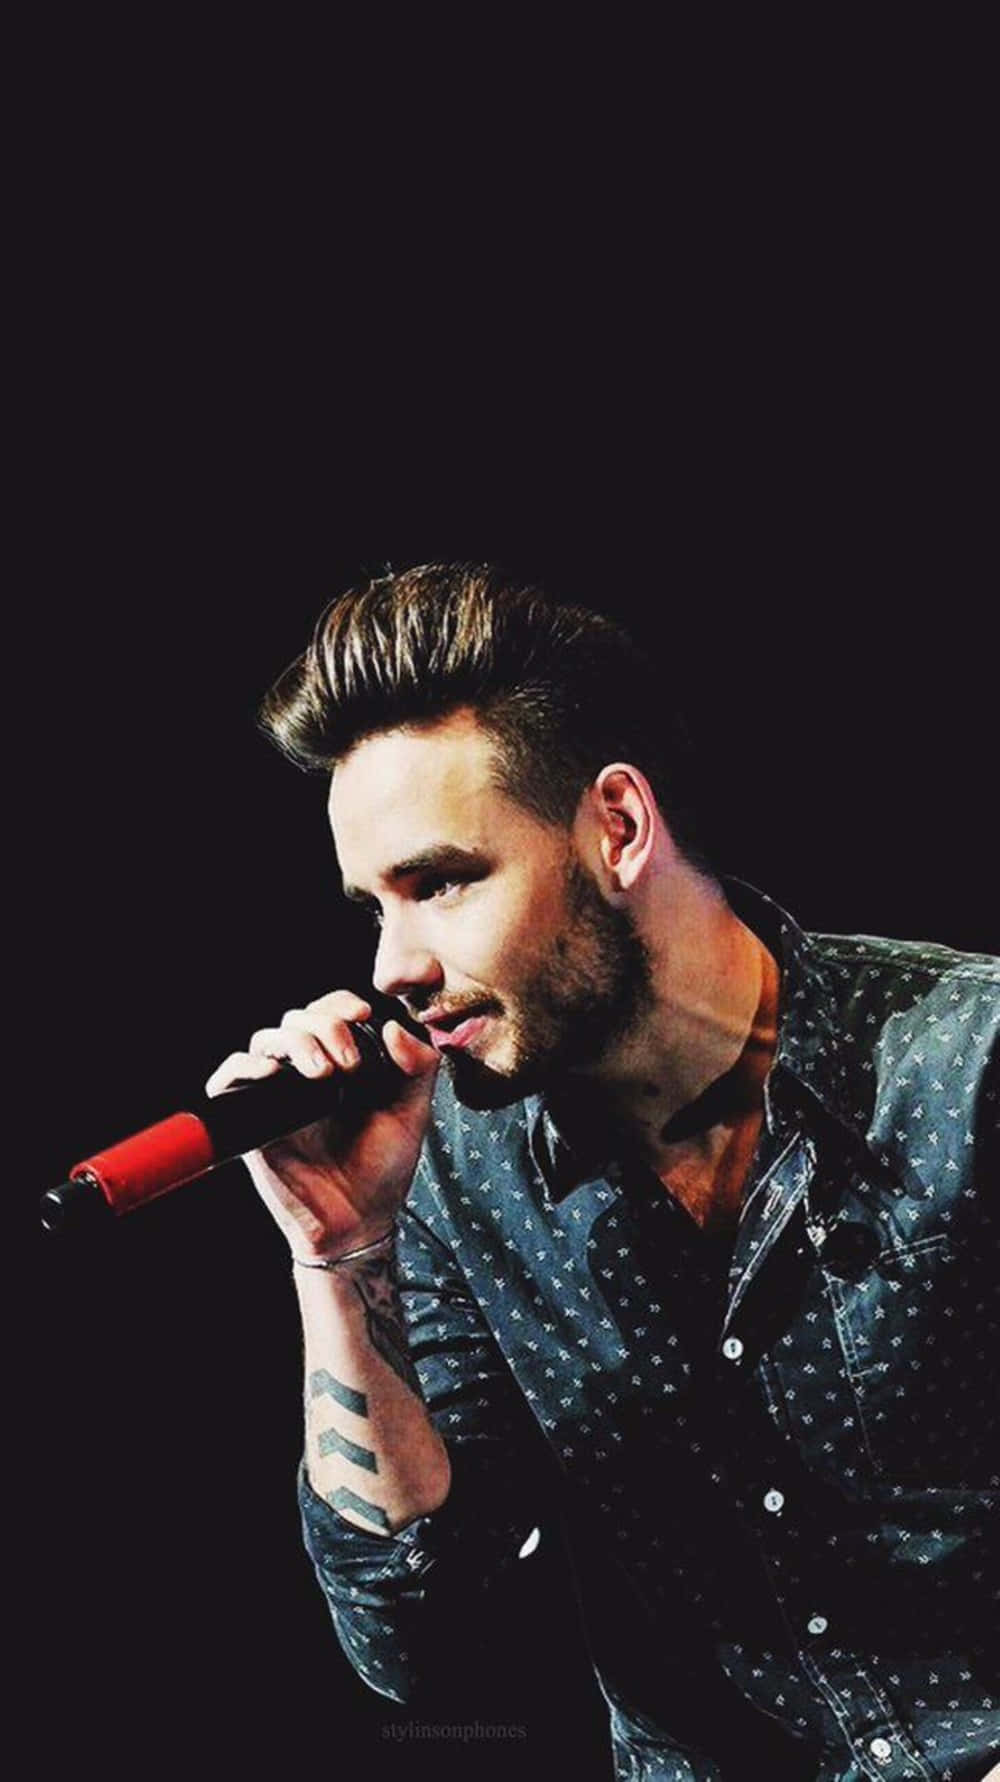 Liam Payne Rocks The Stage With His Electrifying Performance.